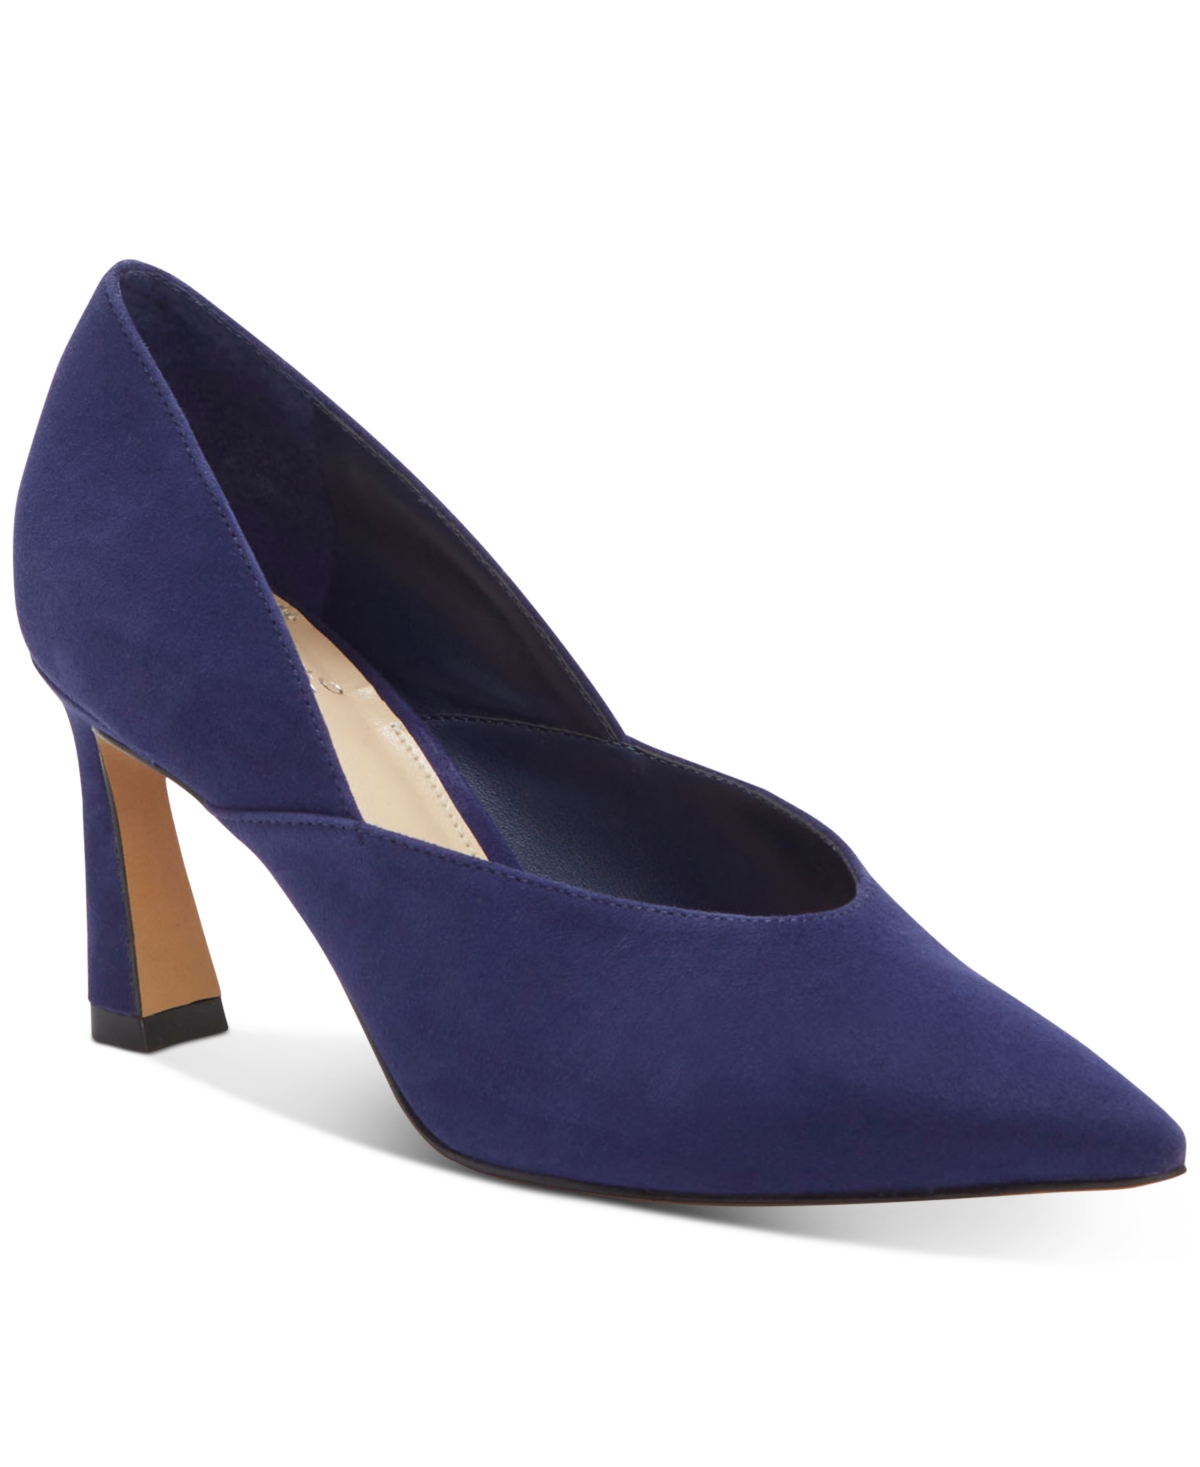 UPC 191707307353 product image for Vince Camuto Women's Kastani Pointed-Toe Pumps Women's Shoes | upcitemdb.com